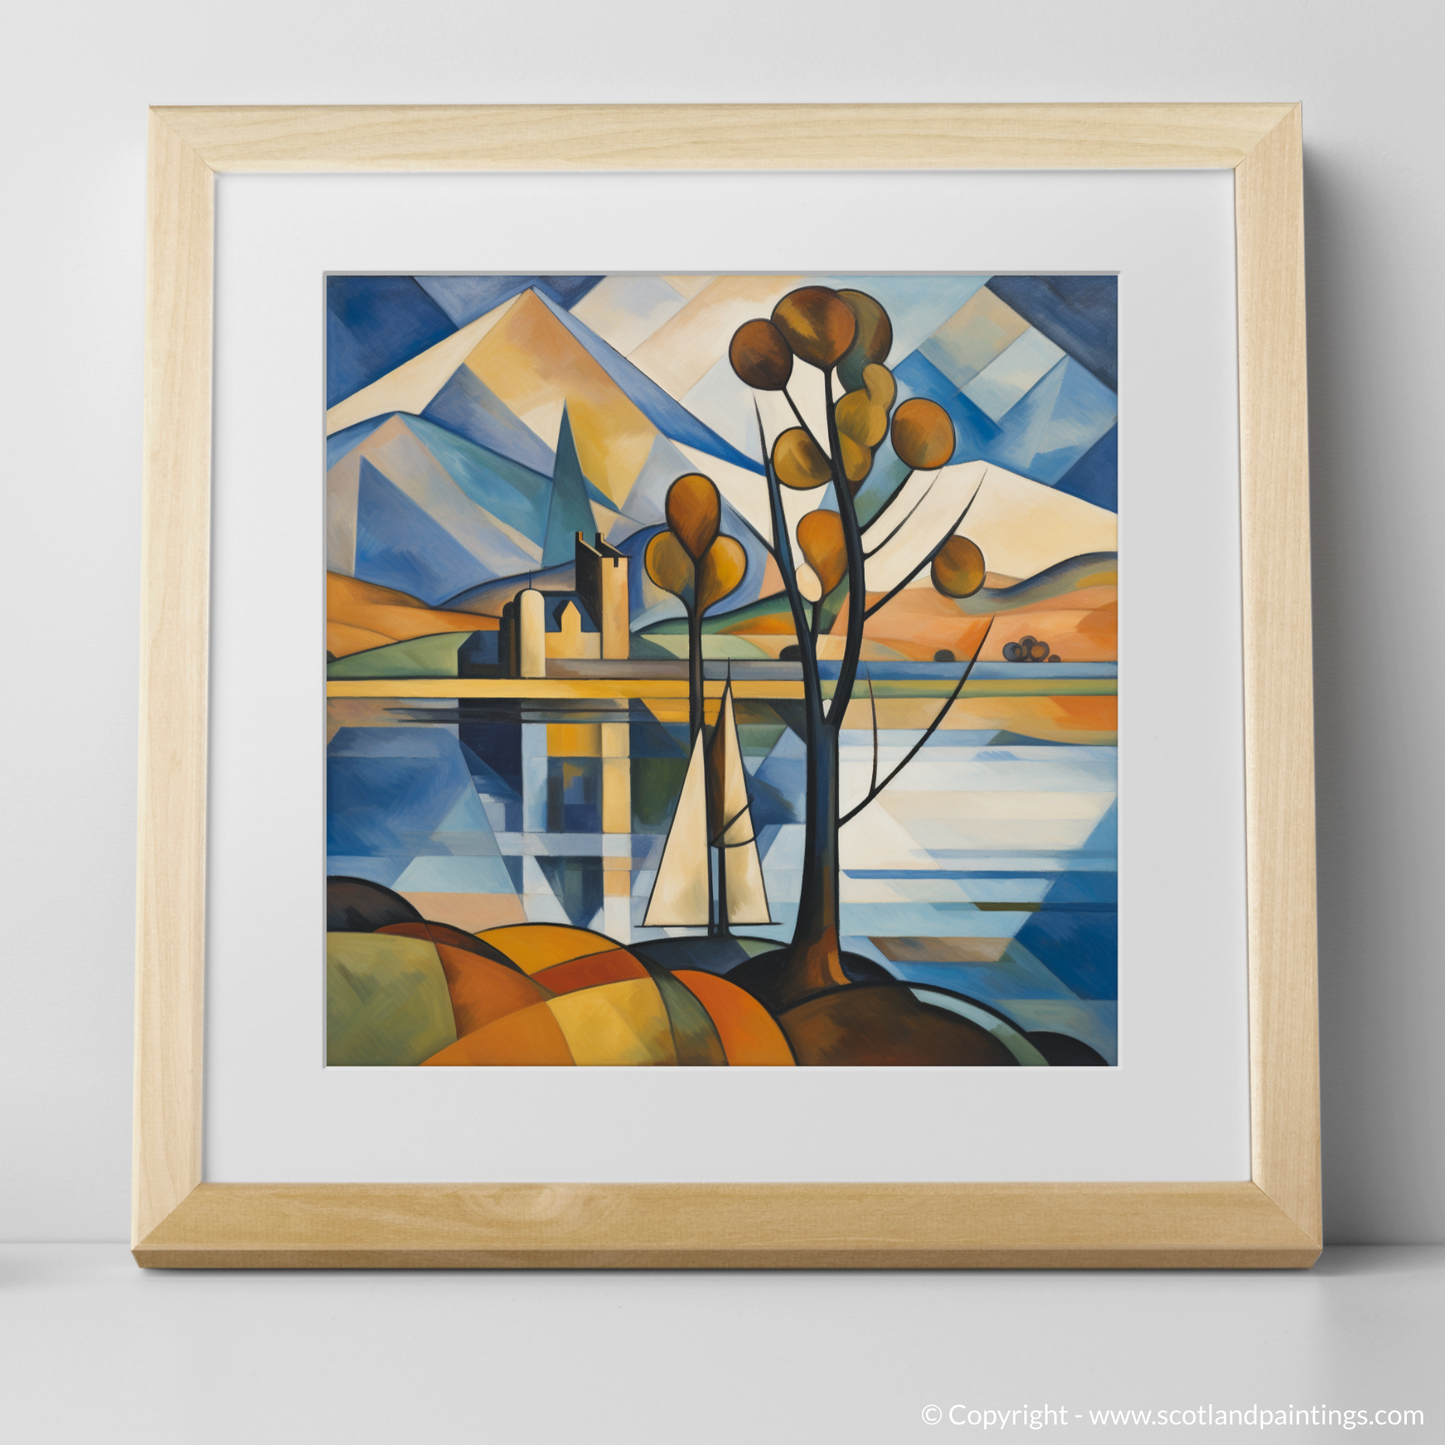 Cubist Vision of Loch Leven's Tranquility